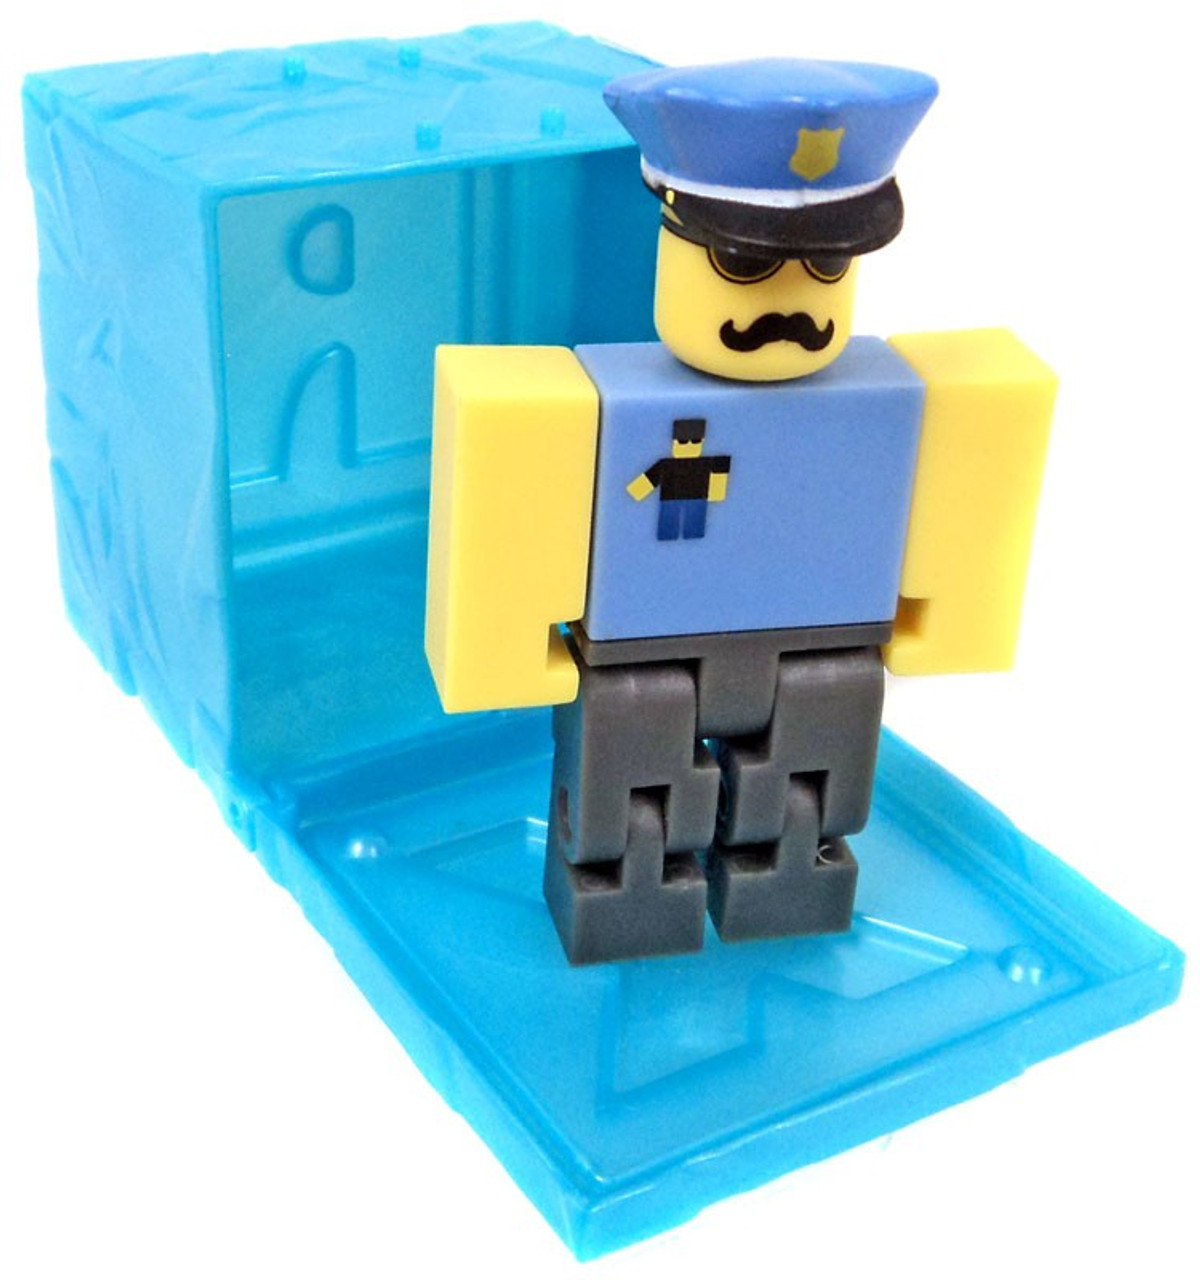 Roblox Red Series 3 Retail Tycoon Rent A Cop 3 Mini Figure Blue Cube With Online Code Loose Jazwares Toywiz - codes for overwatch tycoon roblox